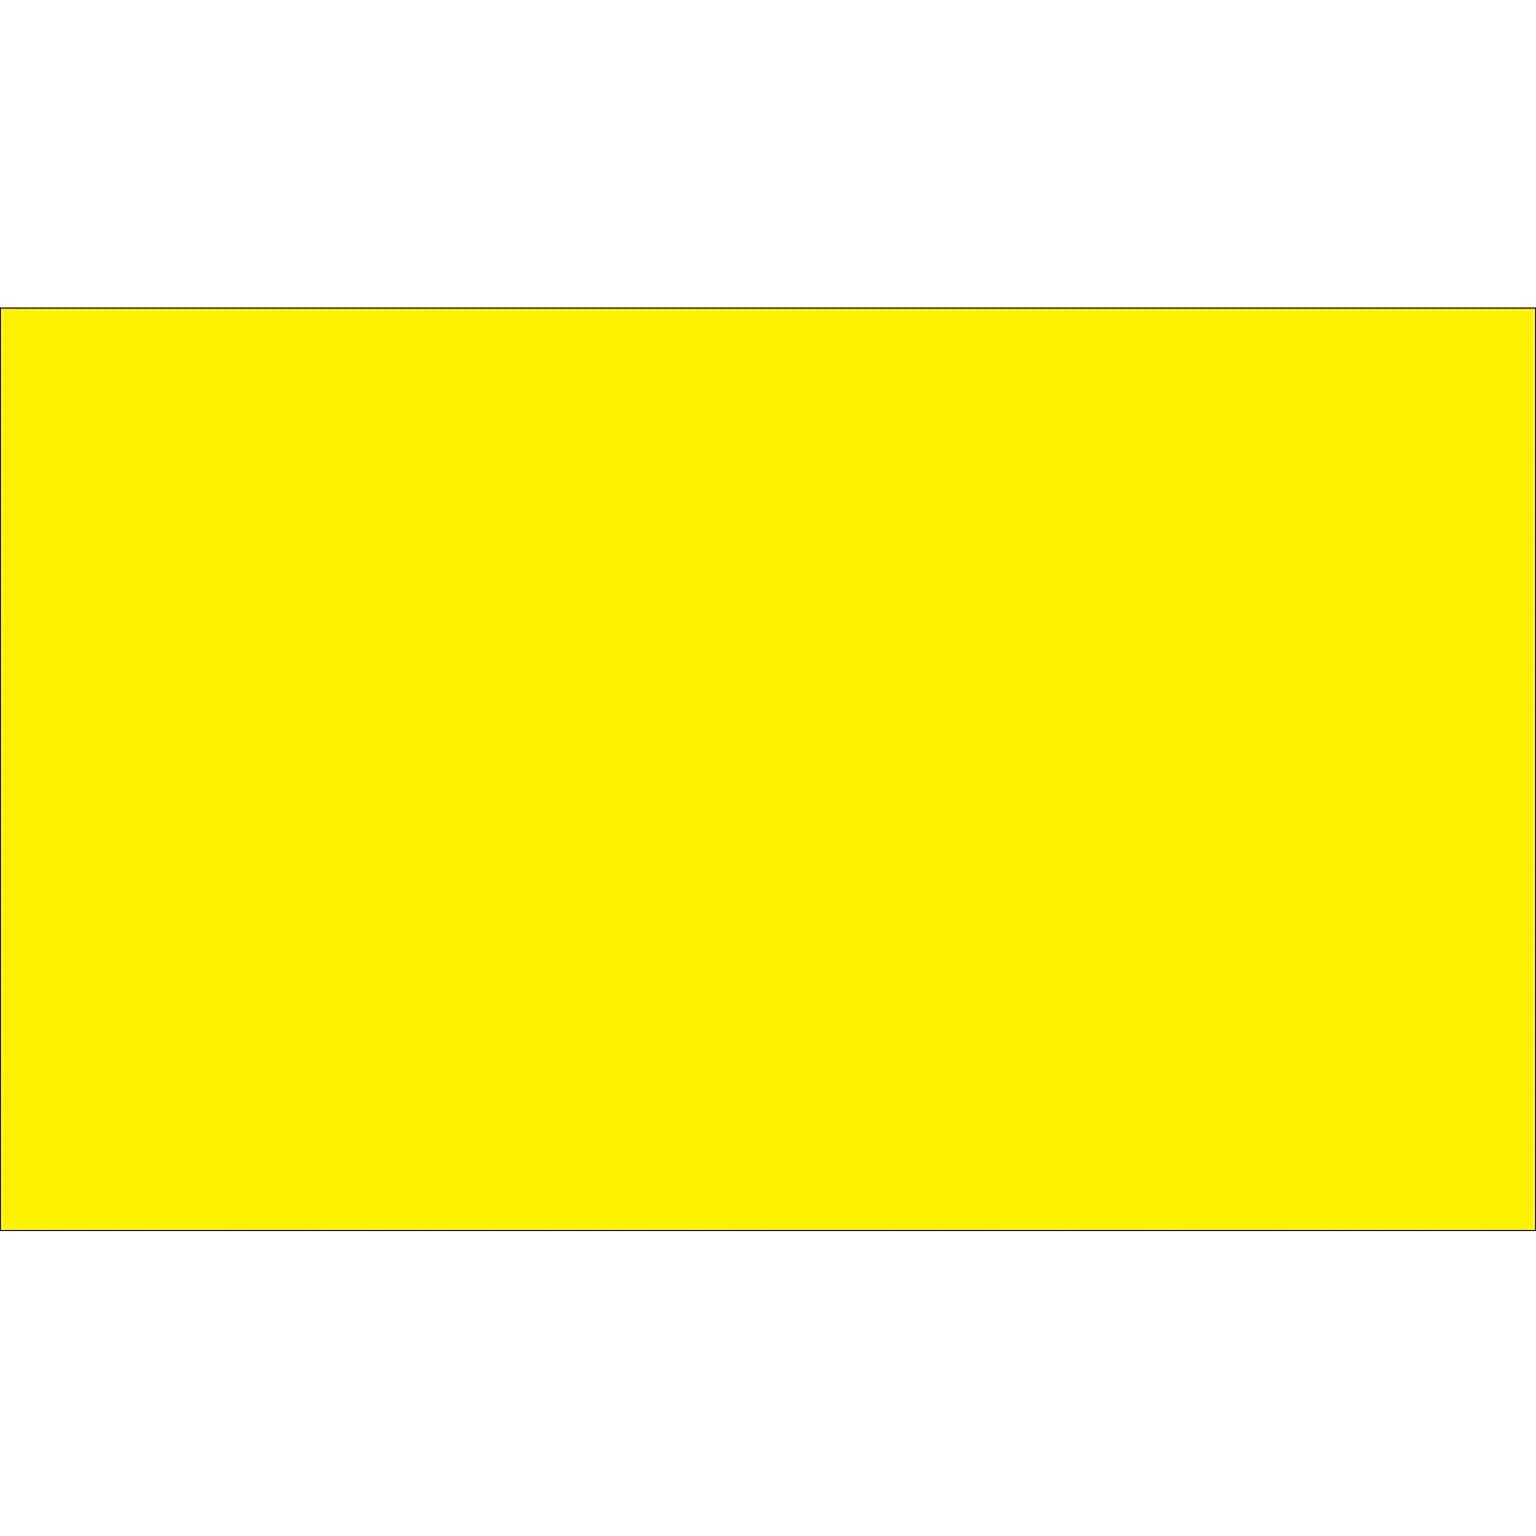 Tape Logic 5 x 3 Rectangle Inventory Label, Fluorescent Yellow, 500/Roll